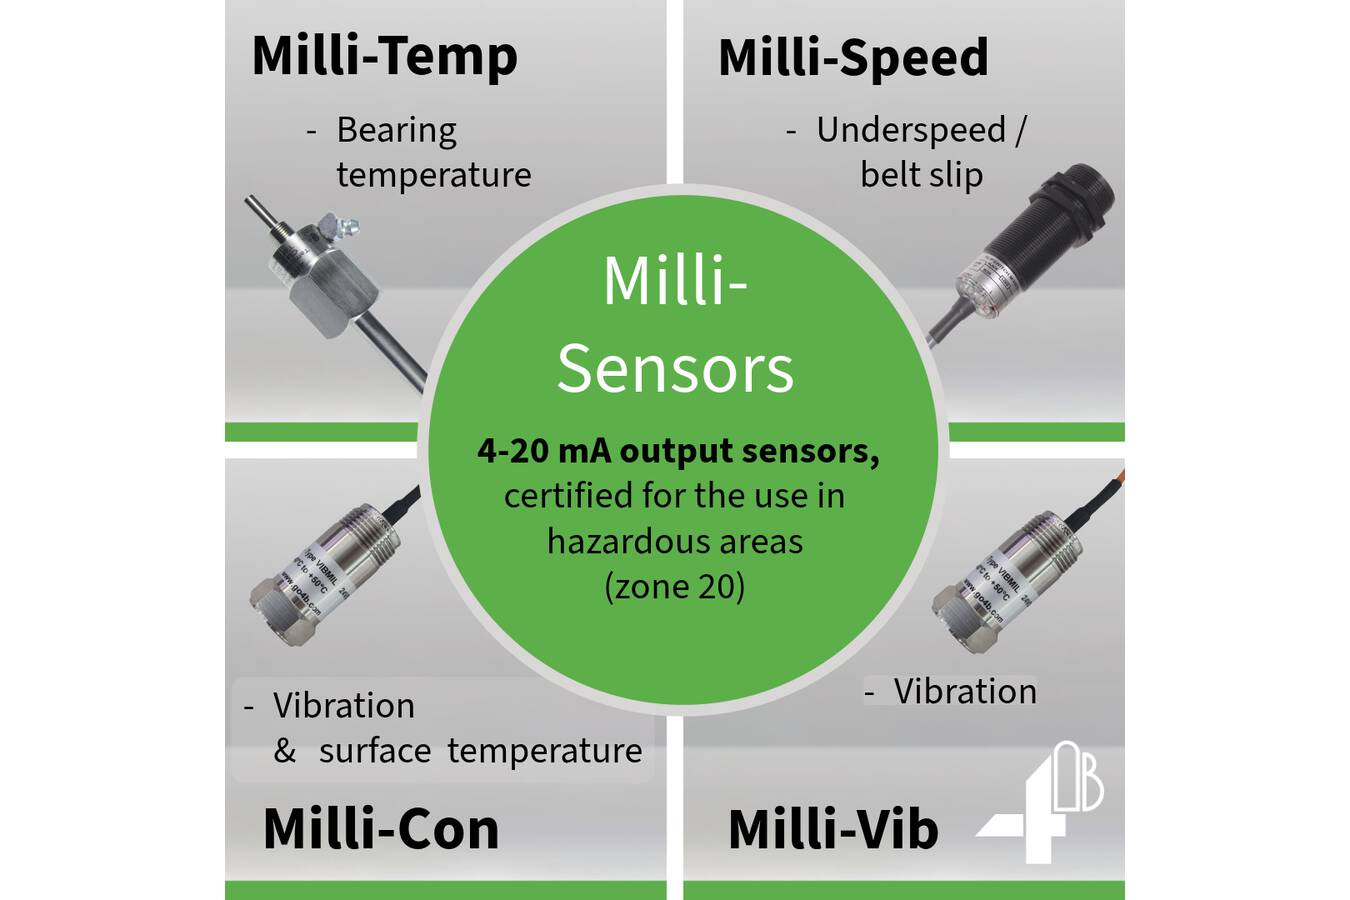 4B expands ”Milli”- range of ATEX approved sensors  4B Group expand their ATEX approved “Milli” range with thethe Milli-Vib and Milli-Con vibration sensors, both suitable for heavy duty industrial applications.